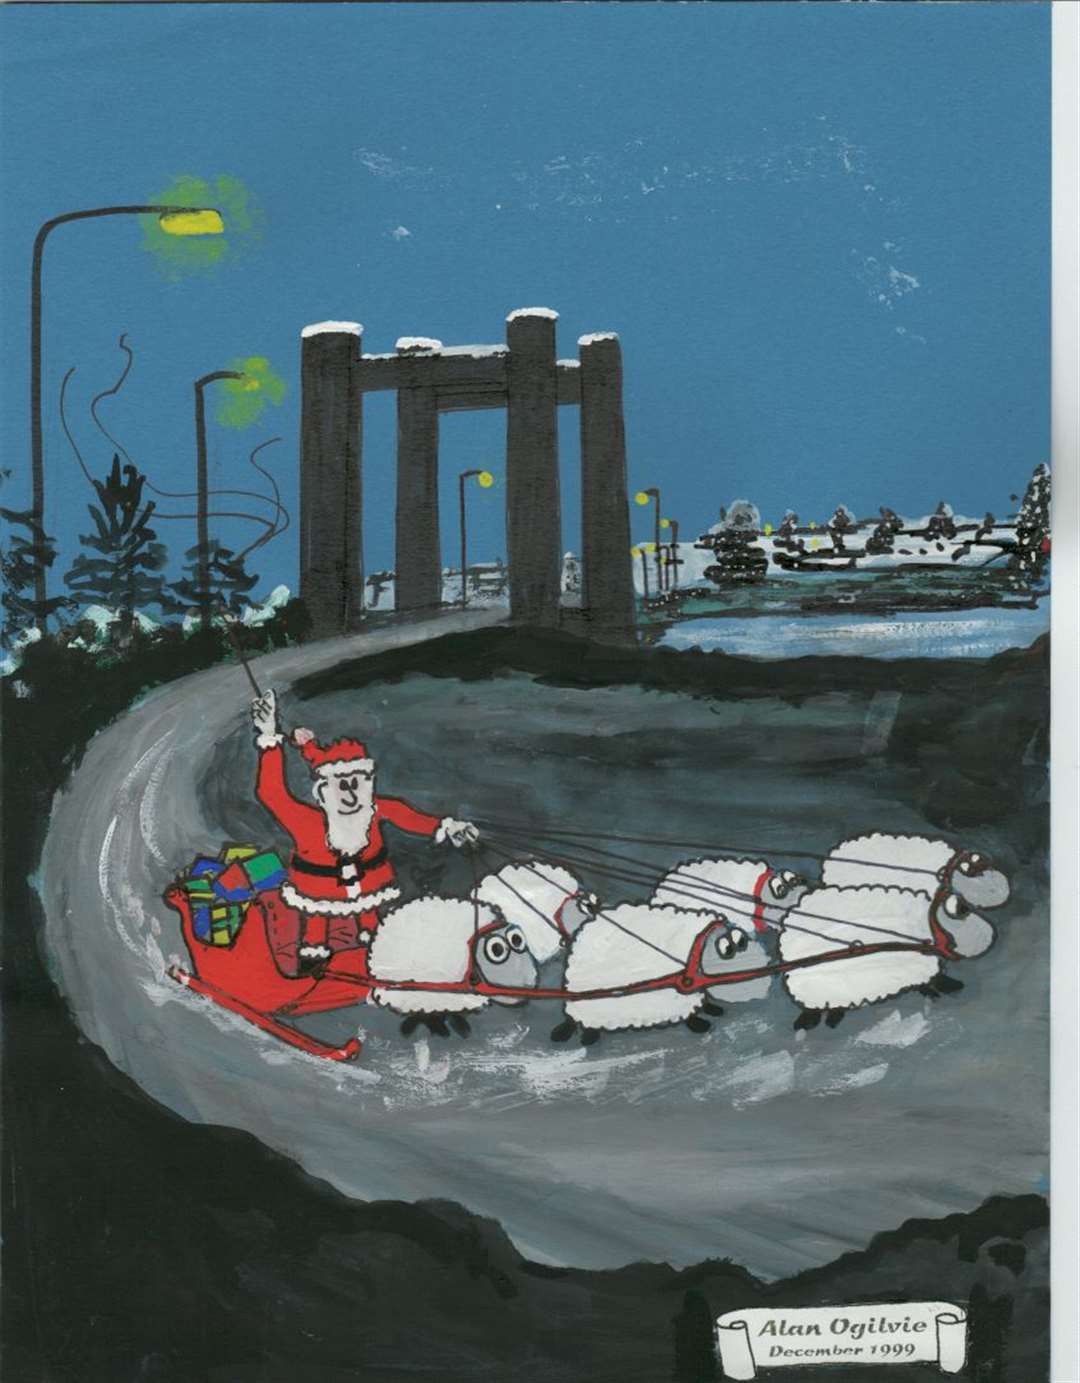 This was Alan Ogilvie's first Sheppey Christmas card from 2000 showing Santa being pulled across the old snow-capped Kingsferry Bridge by a team sheep